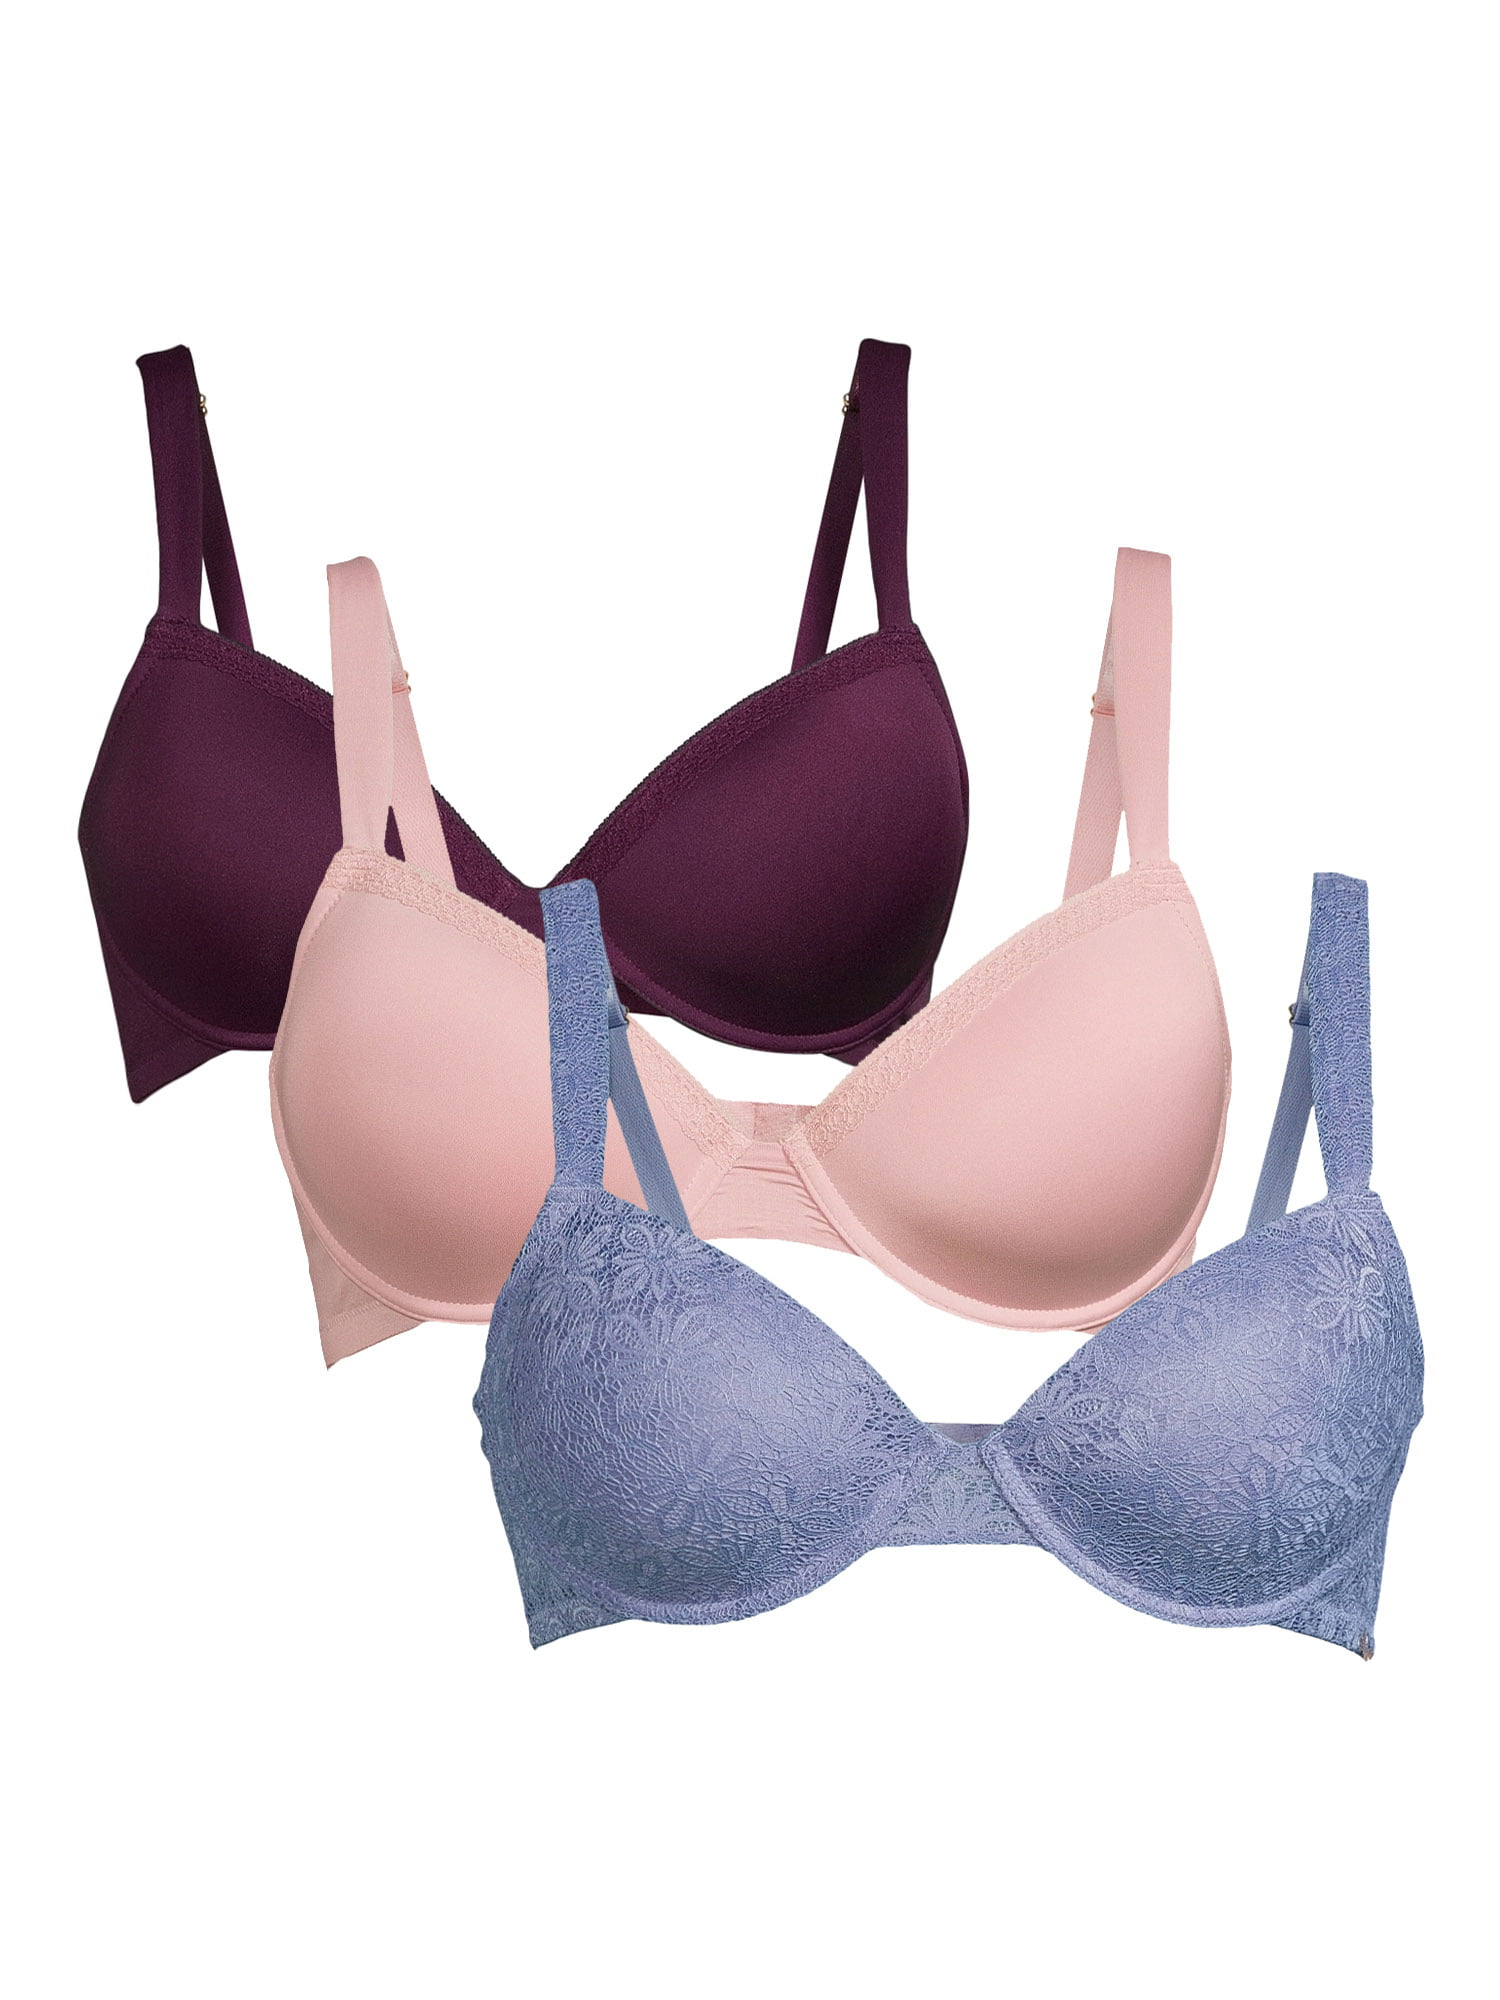 Find more Brand New Jessica Simpson Sports Bras for sale at up to 90% off